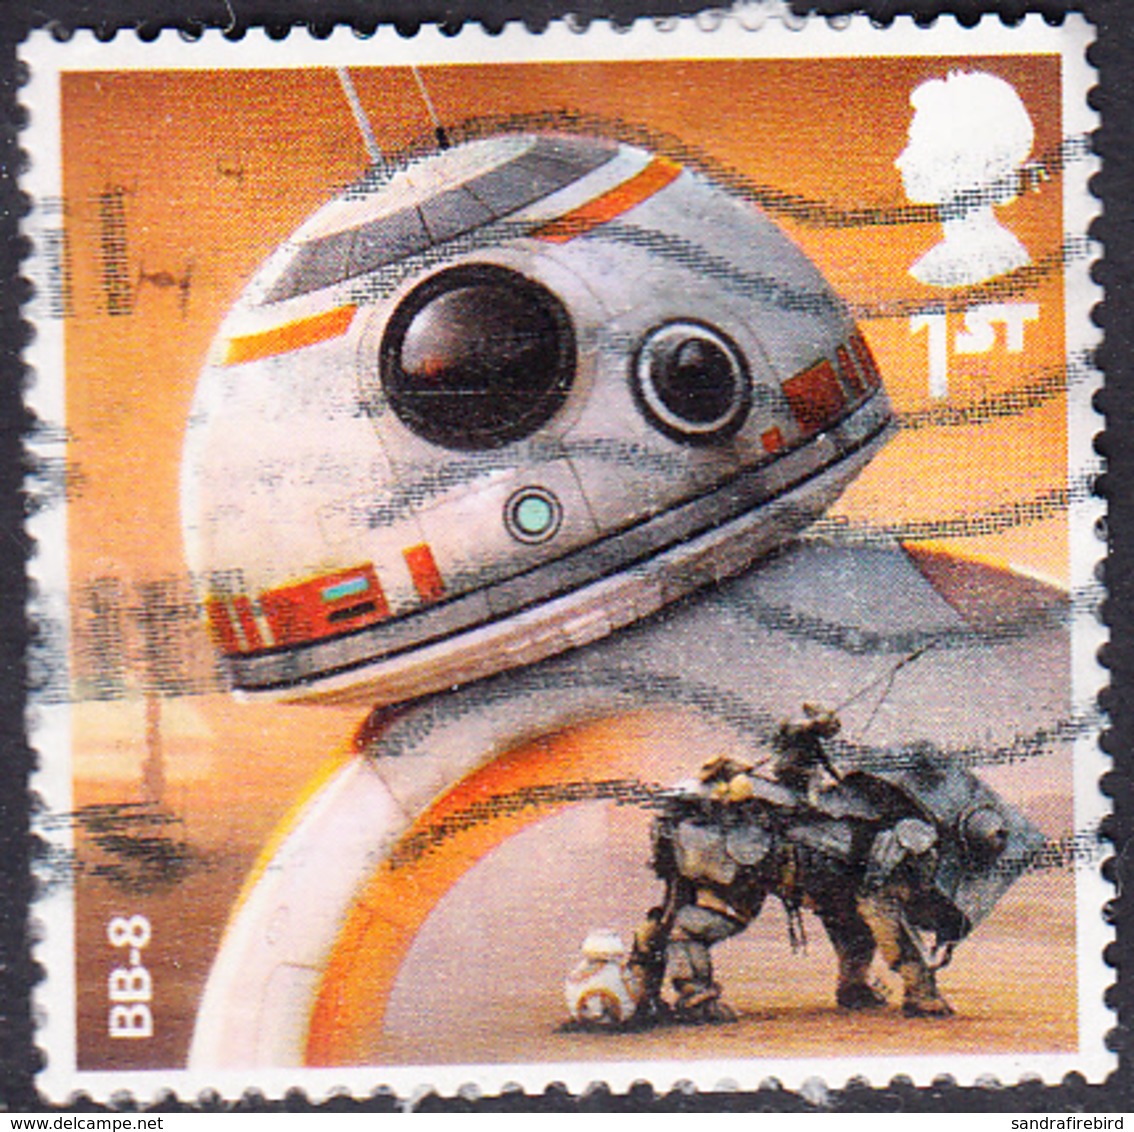 2017   Star Wars (3rd Series) - BB-8 1st Class Stamp SG4011 - Used Stamps